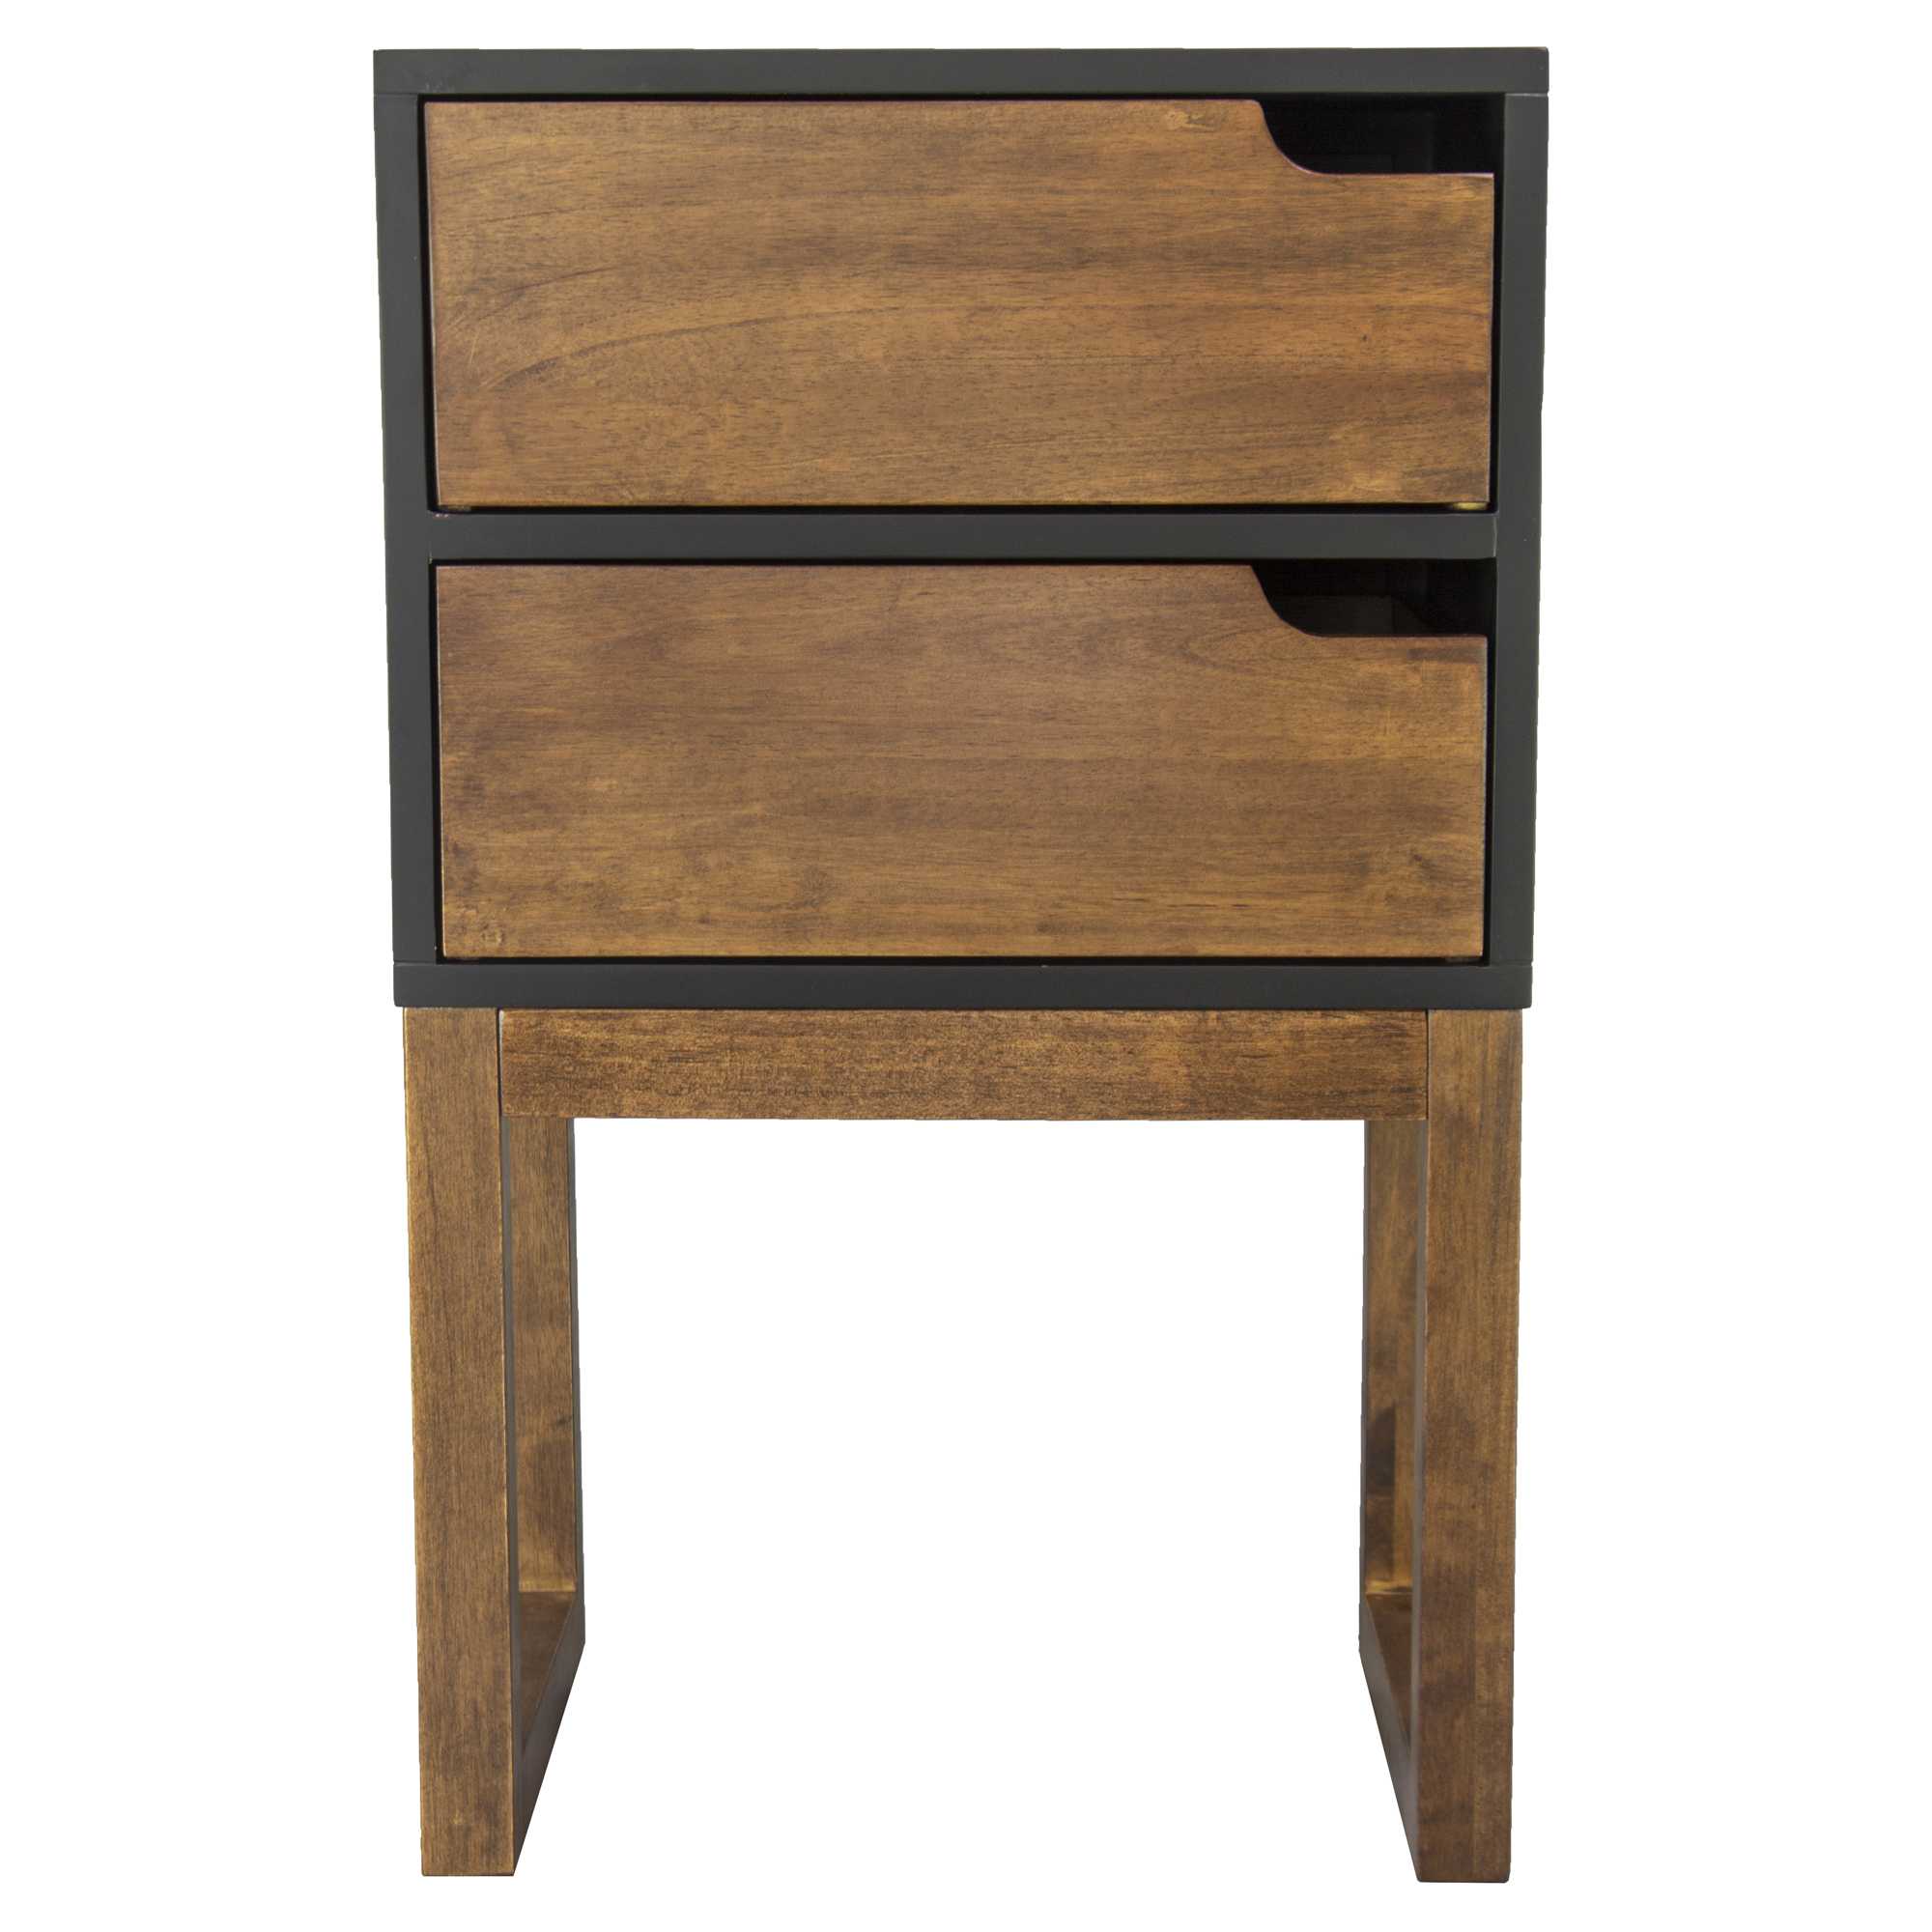 16" X 12" X 26" Black & Mocha Solid Wood Two Drawer Side Table